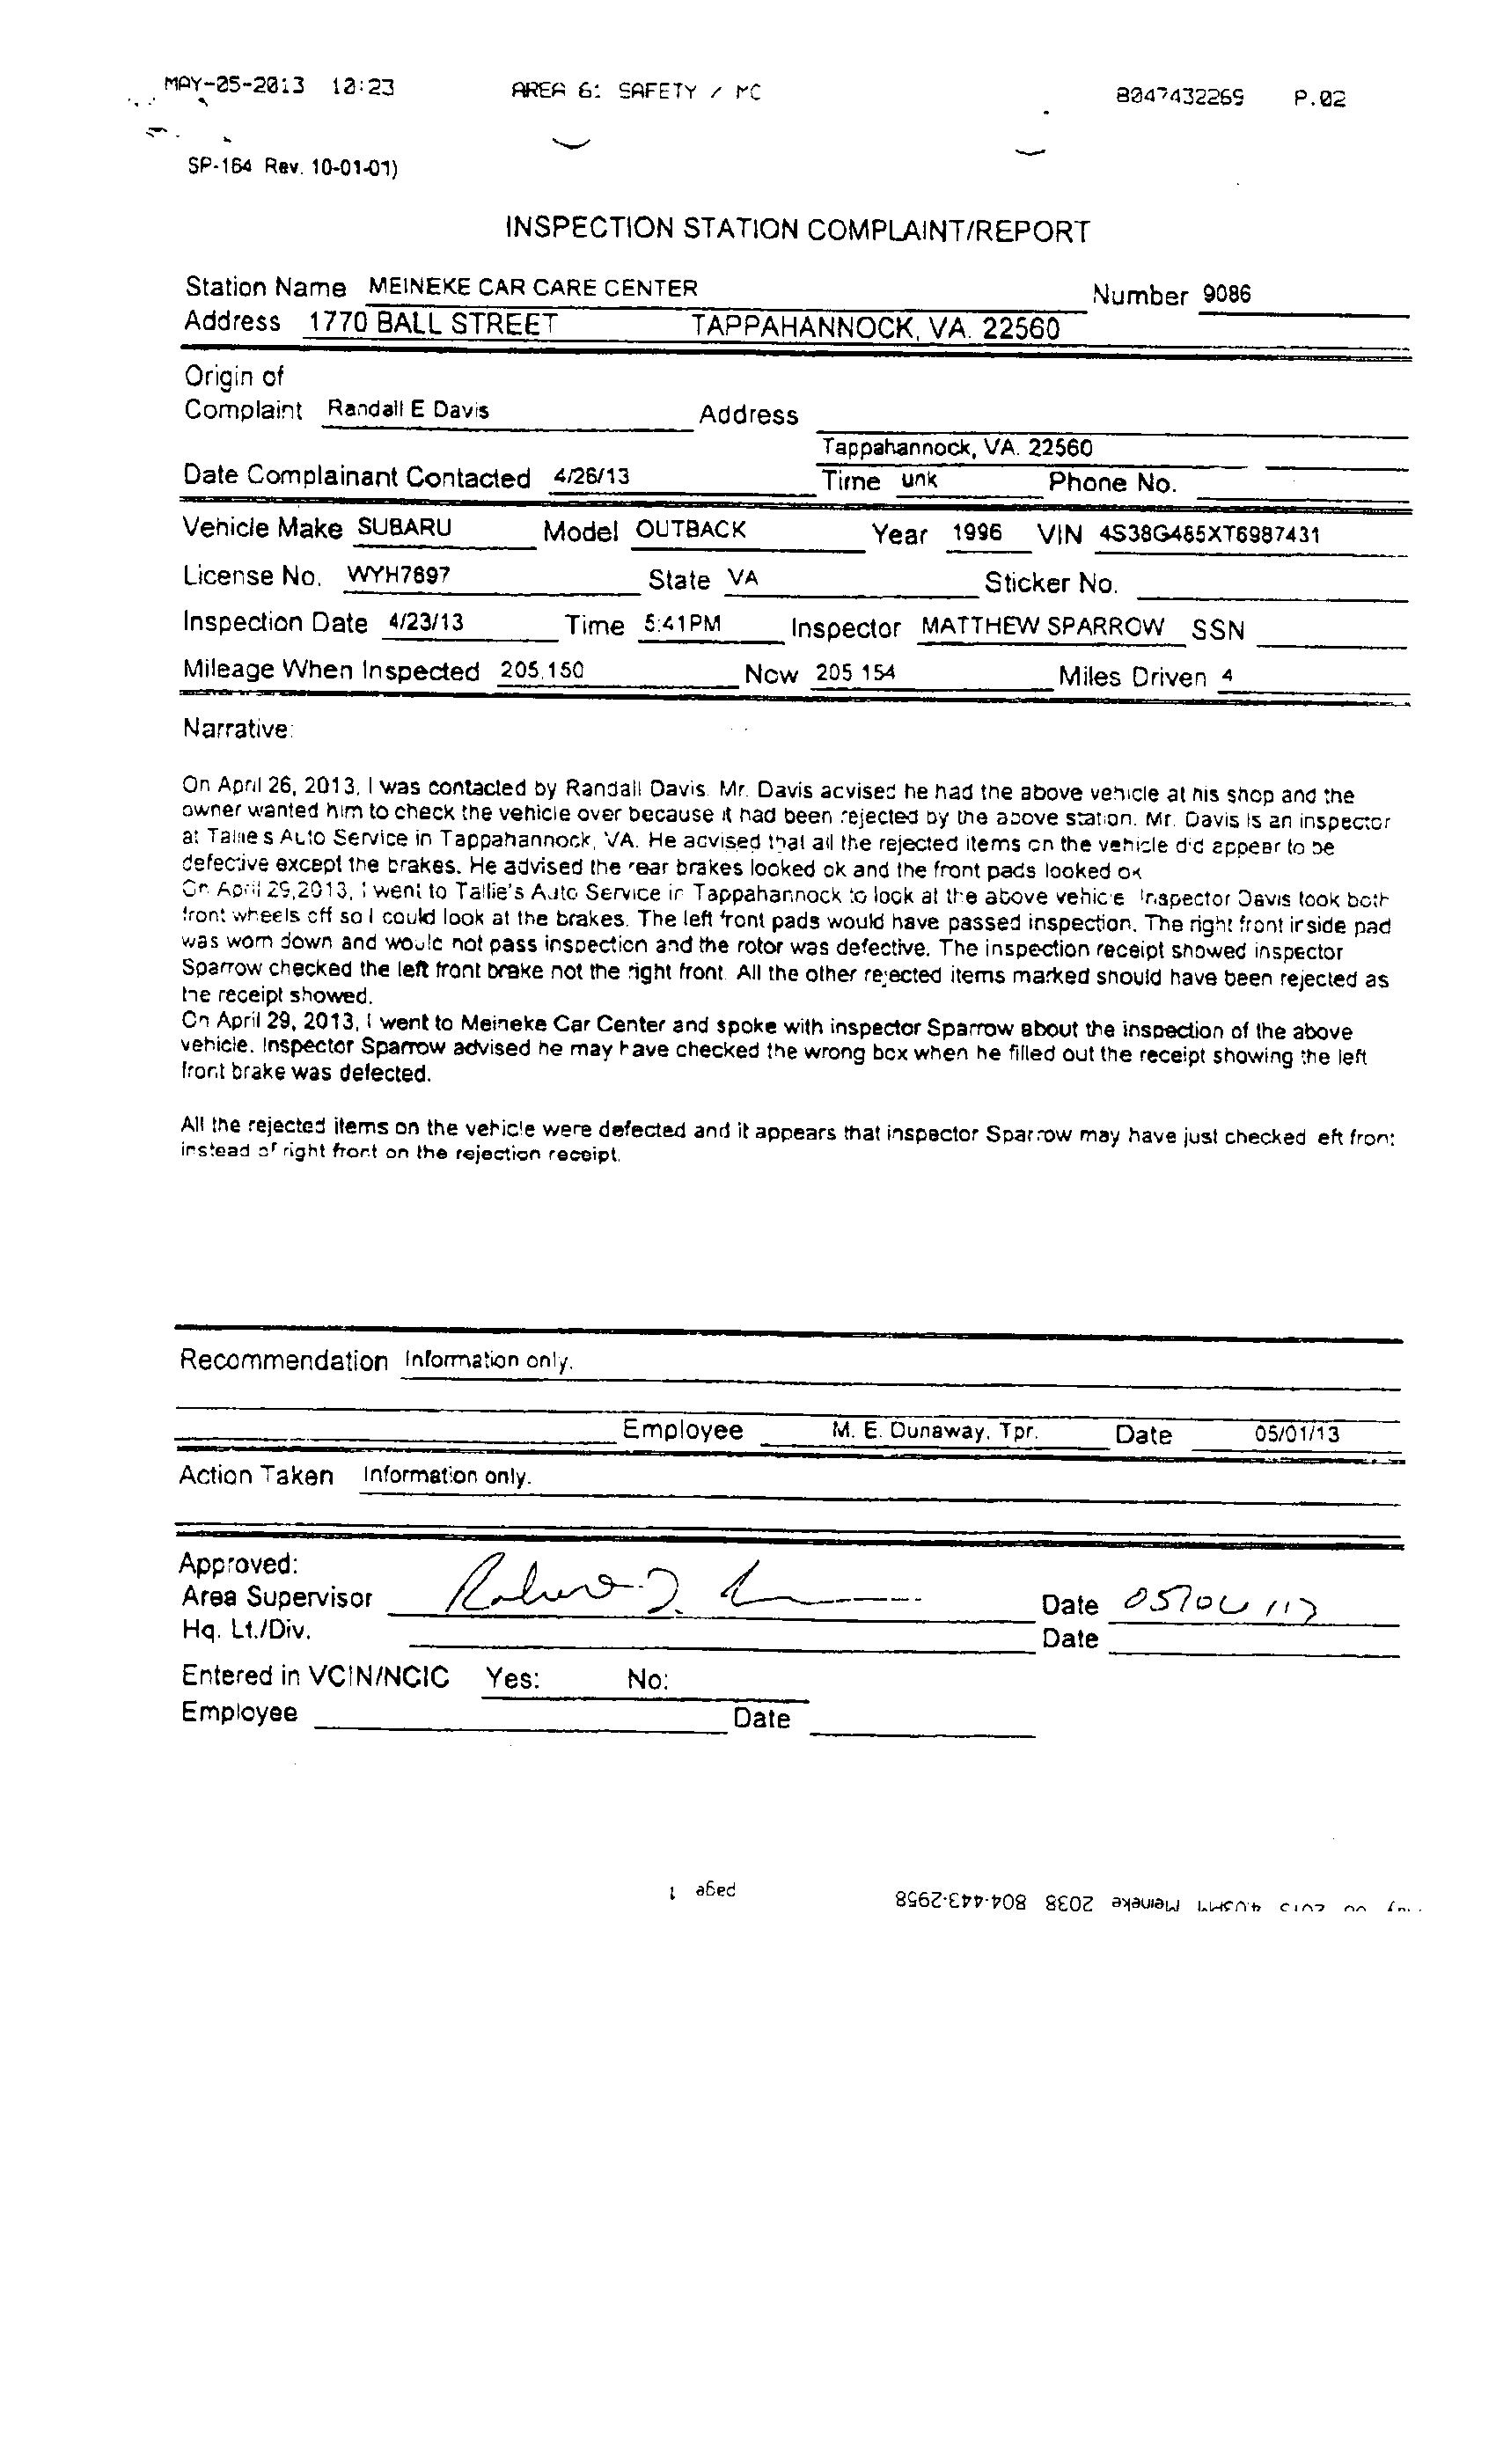 Report filed by Trooper M.E. Dunaway